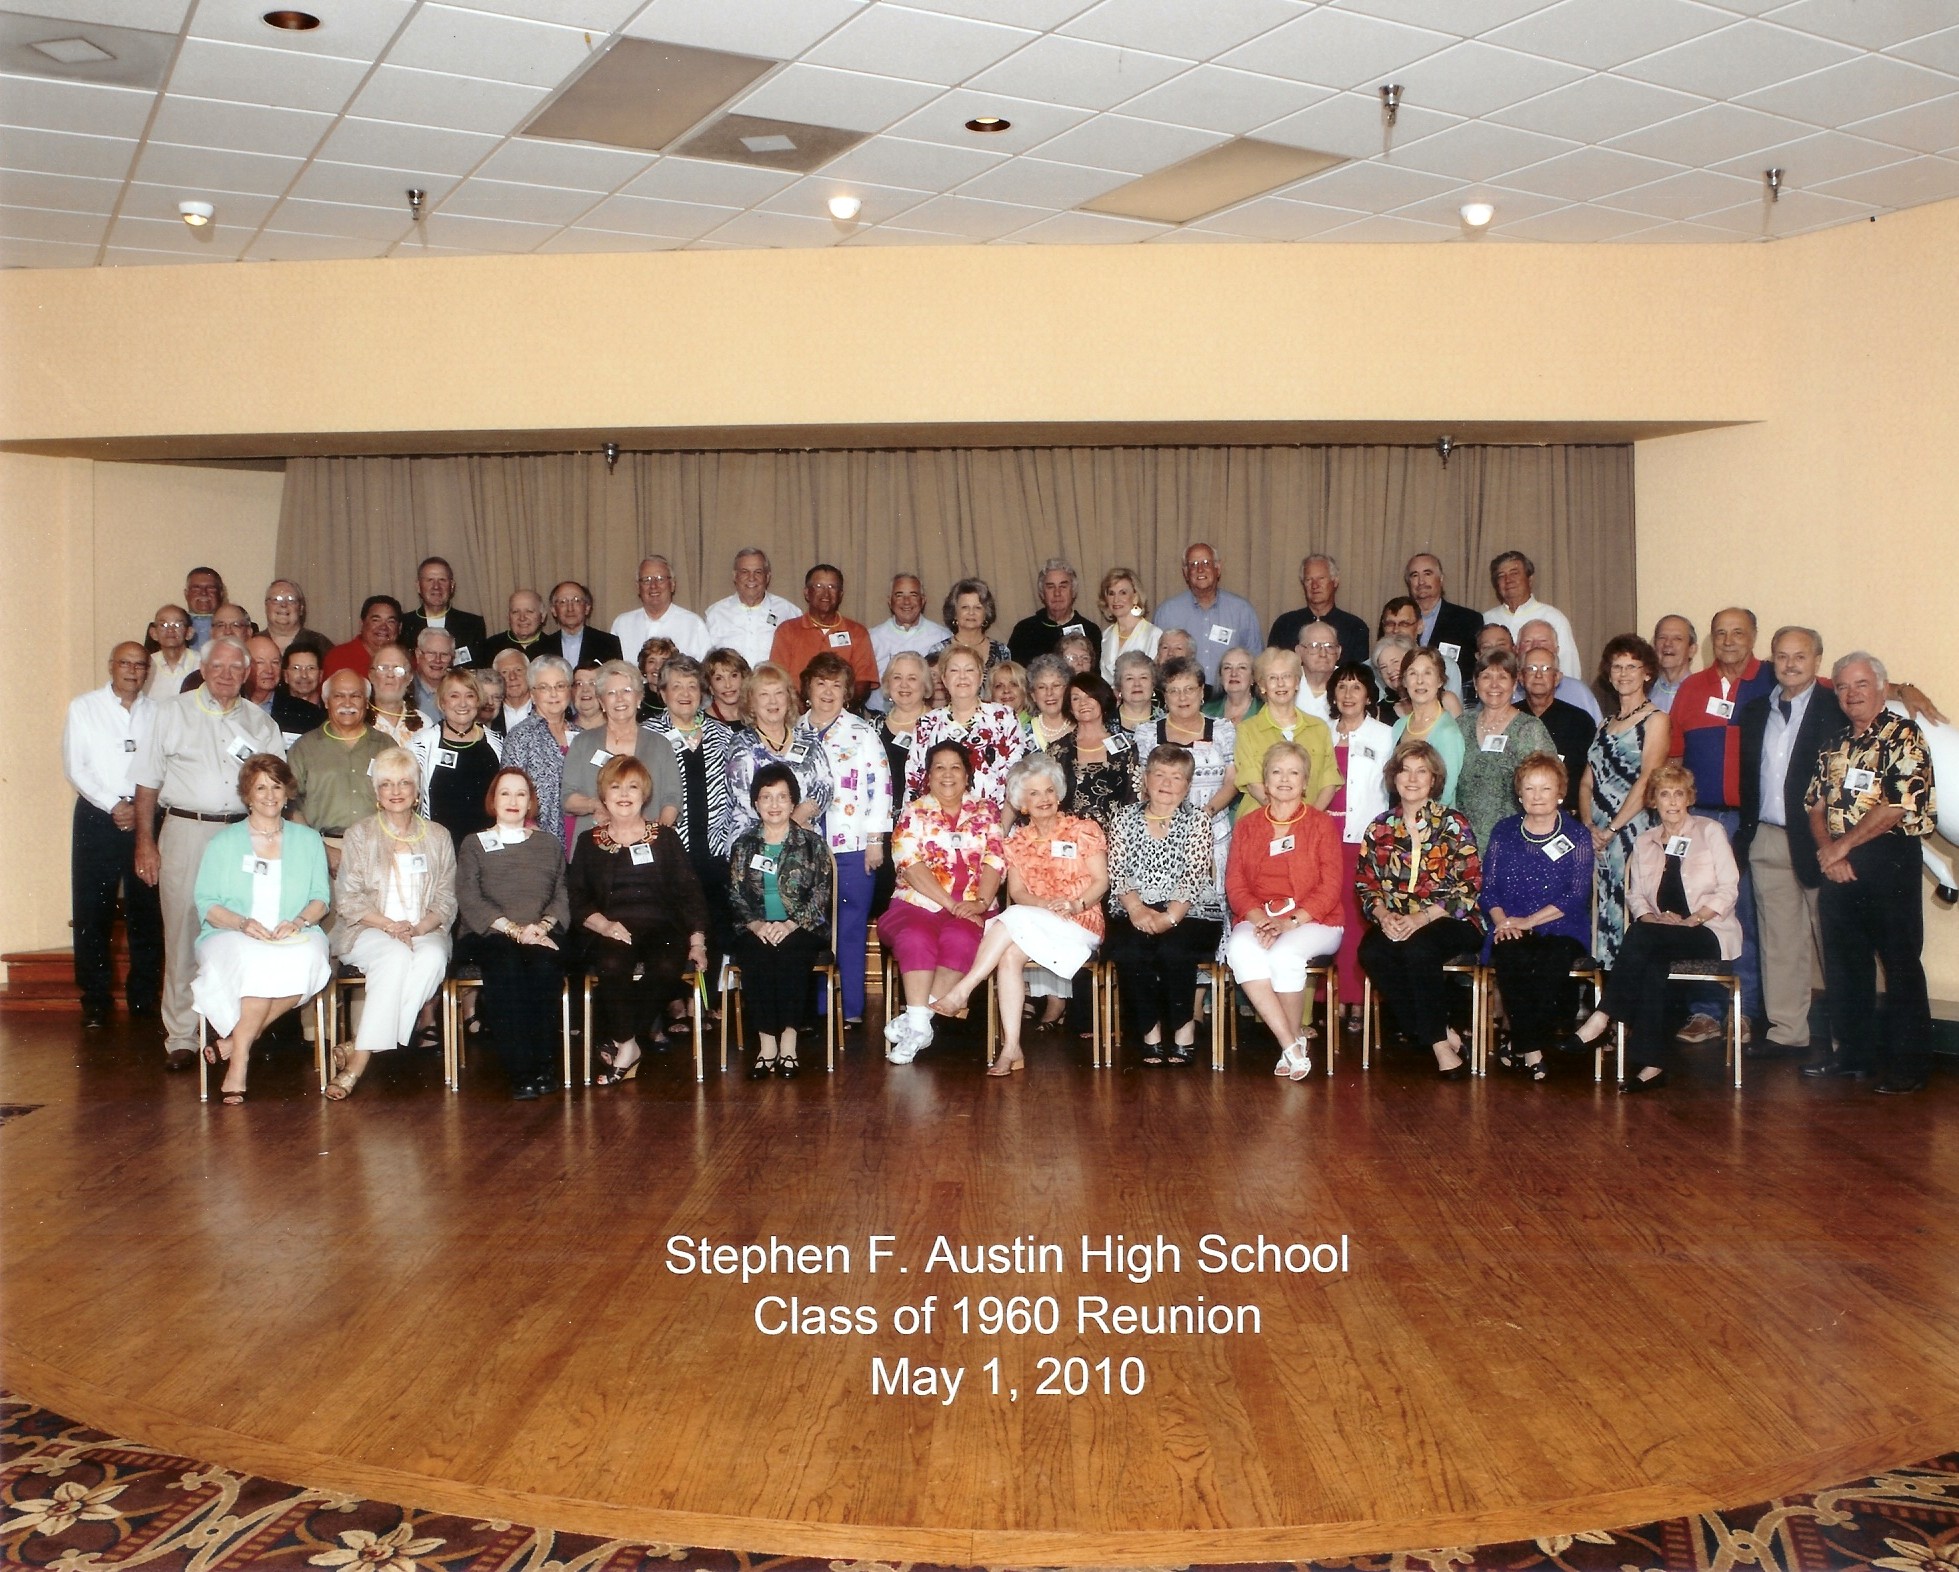 Class Reunion Photo from 2010 ...... DOUBLE CLICK ON IMAGE TO ENLARGE